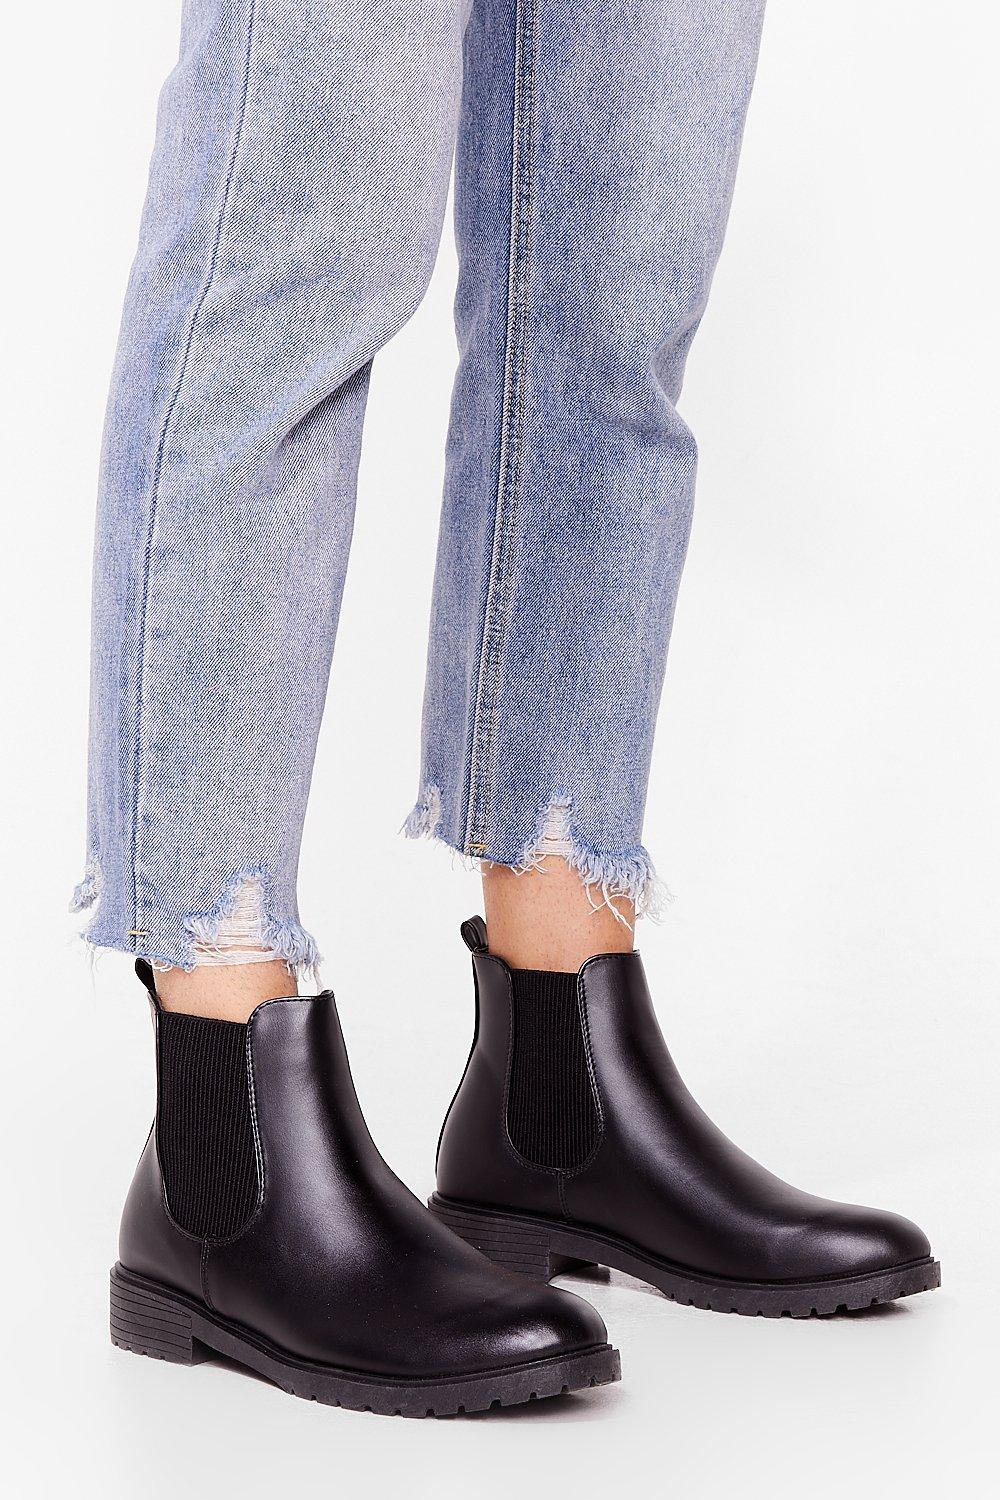 wide flat boots